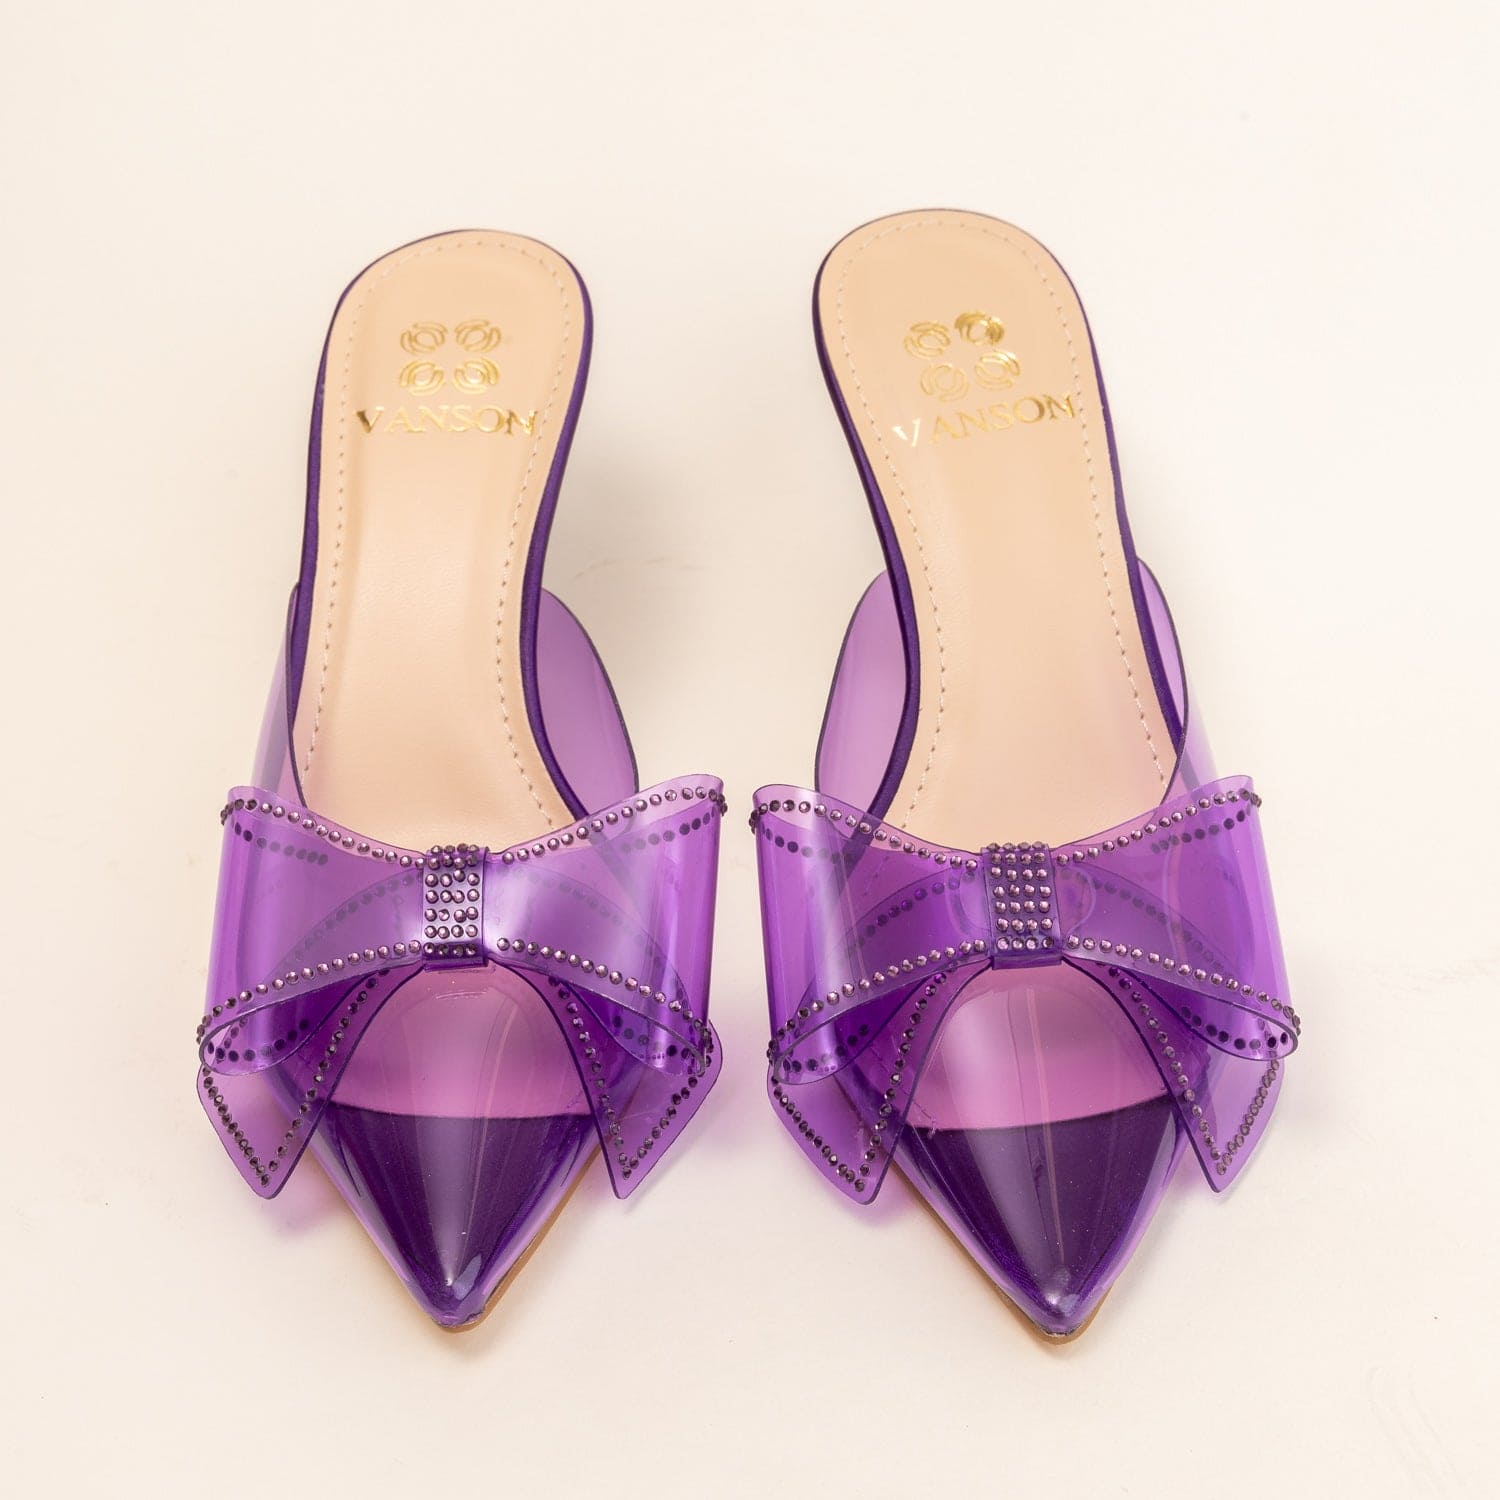 JELLO-Stylish Pumps With Bow in-Purple.